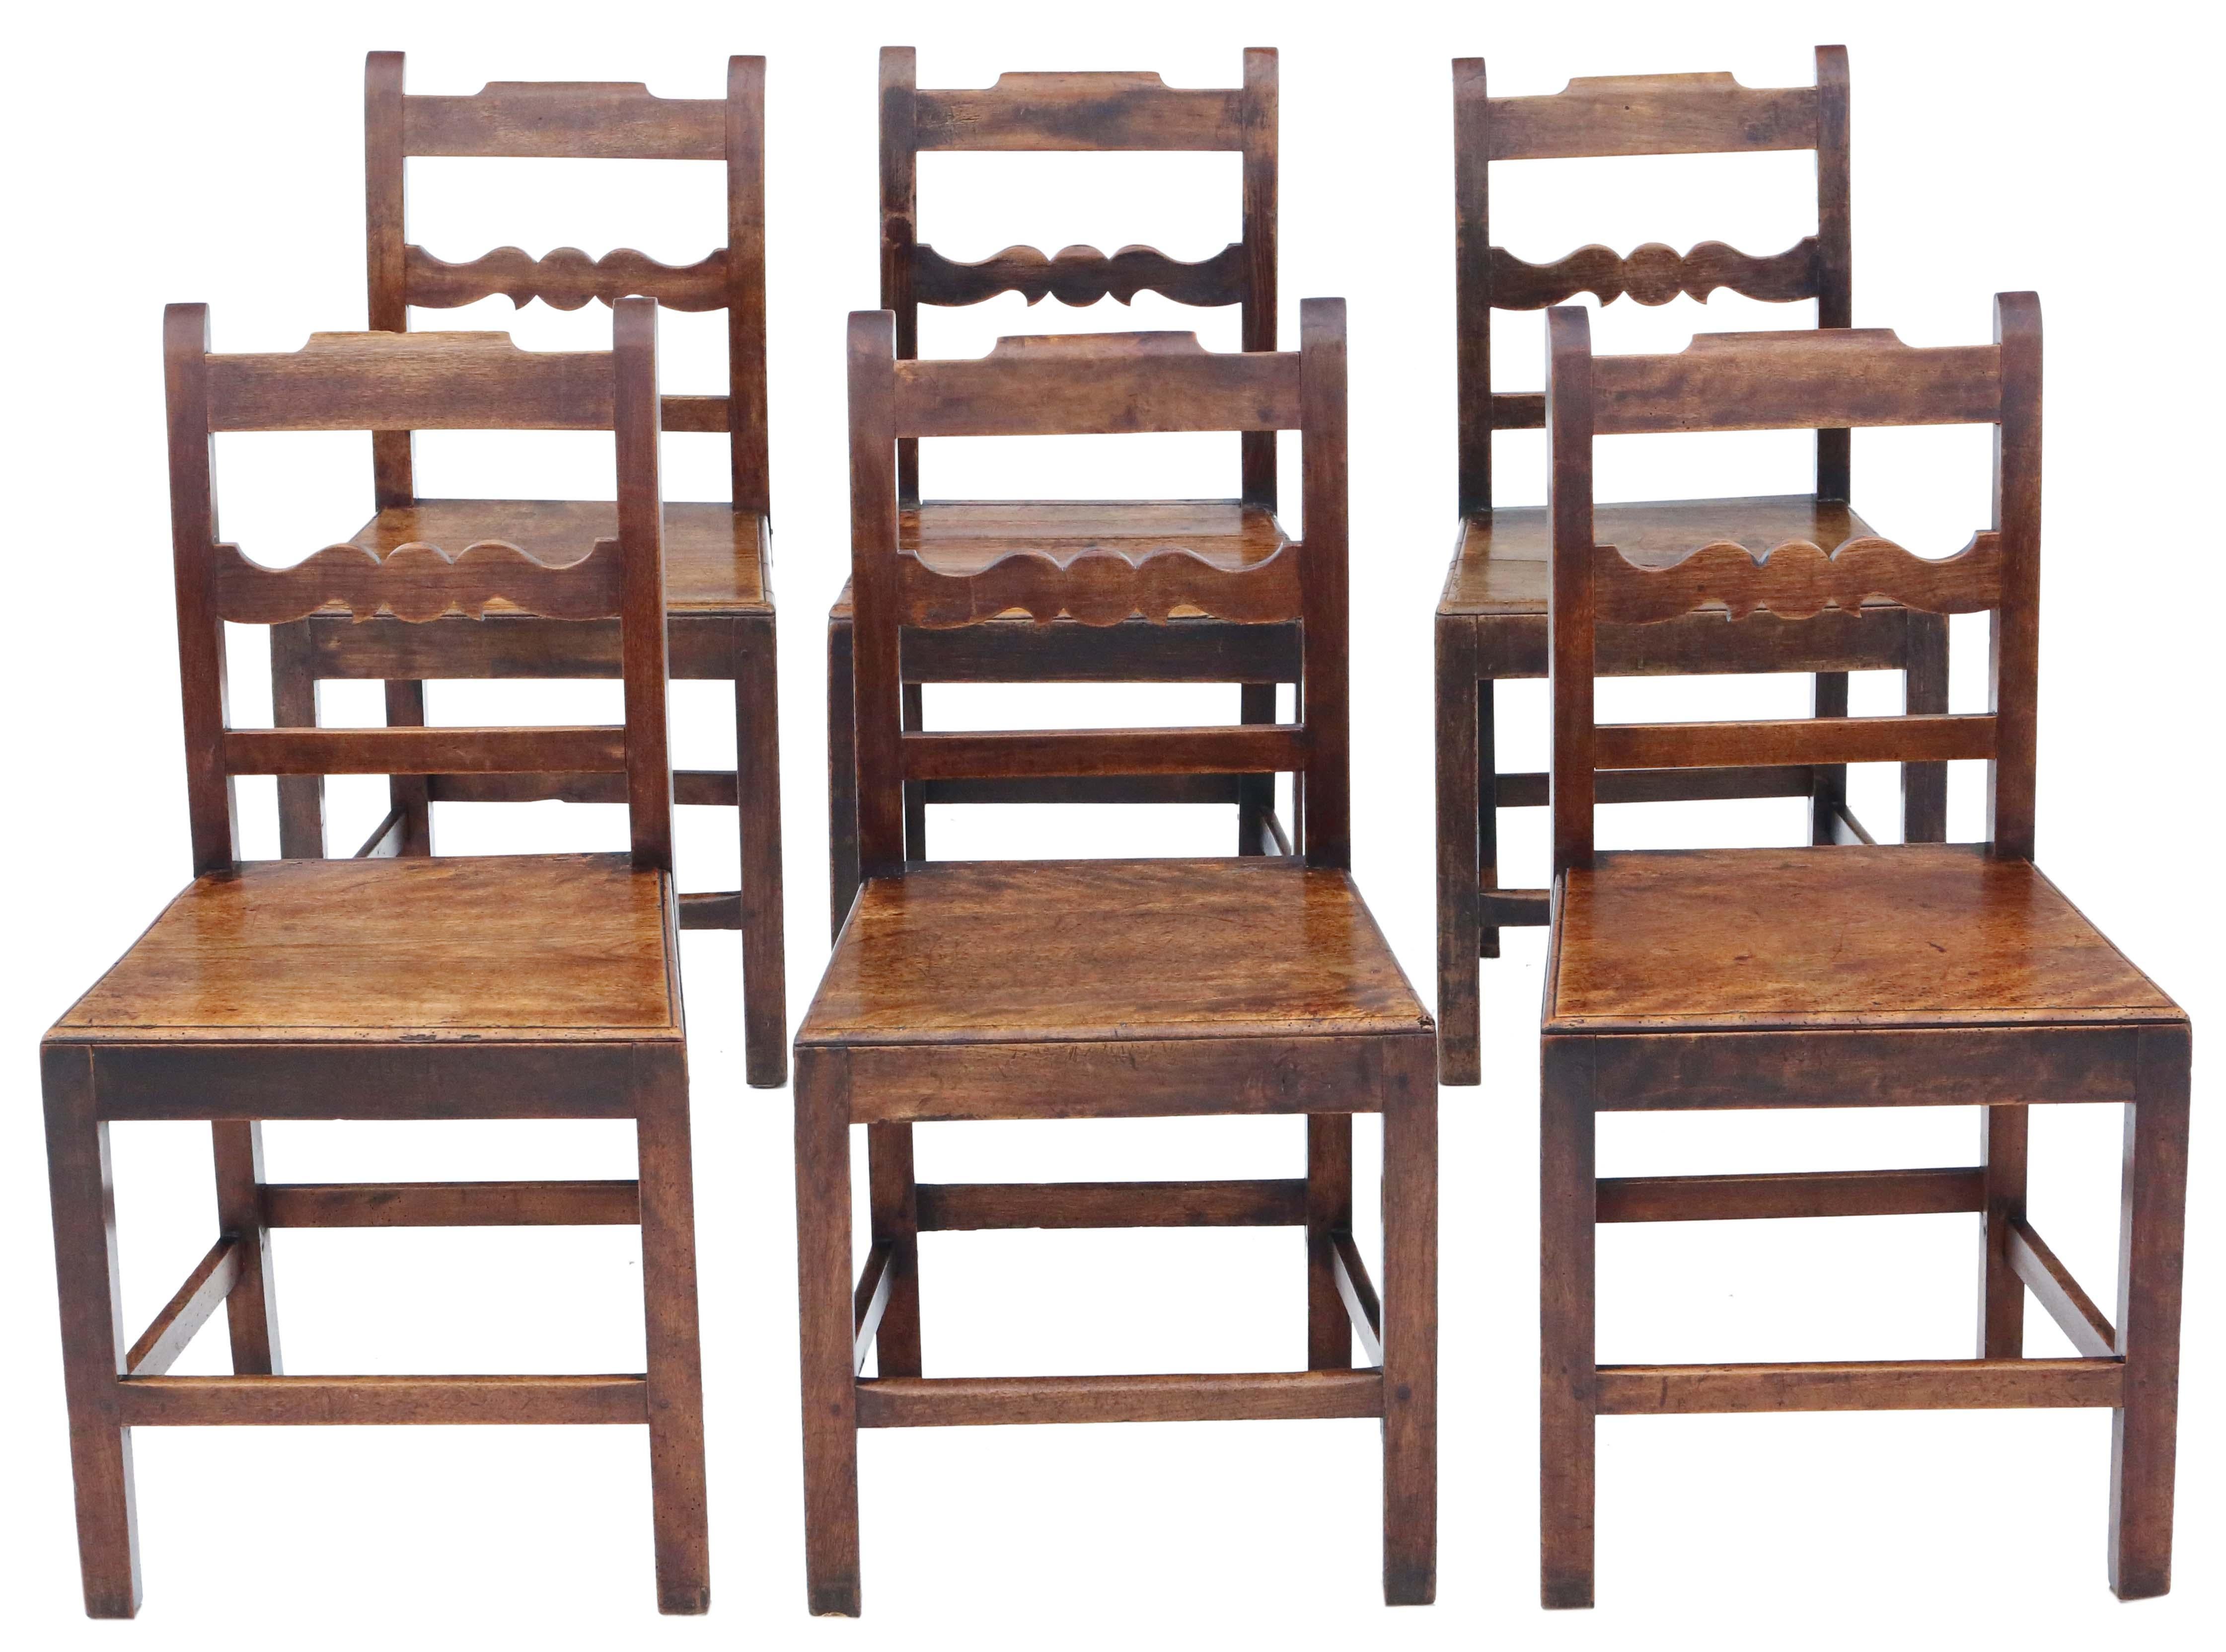 Antique quality matched set of 9 8 6 19th Century elm kitchen dining chairs. There are a set of 6, a pair and an individual chair, however we may split to suit a customer's needs.

Solid, no loose joints. Full of age, character and charm. Best